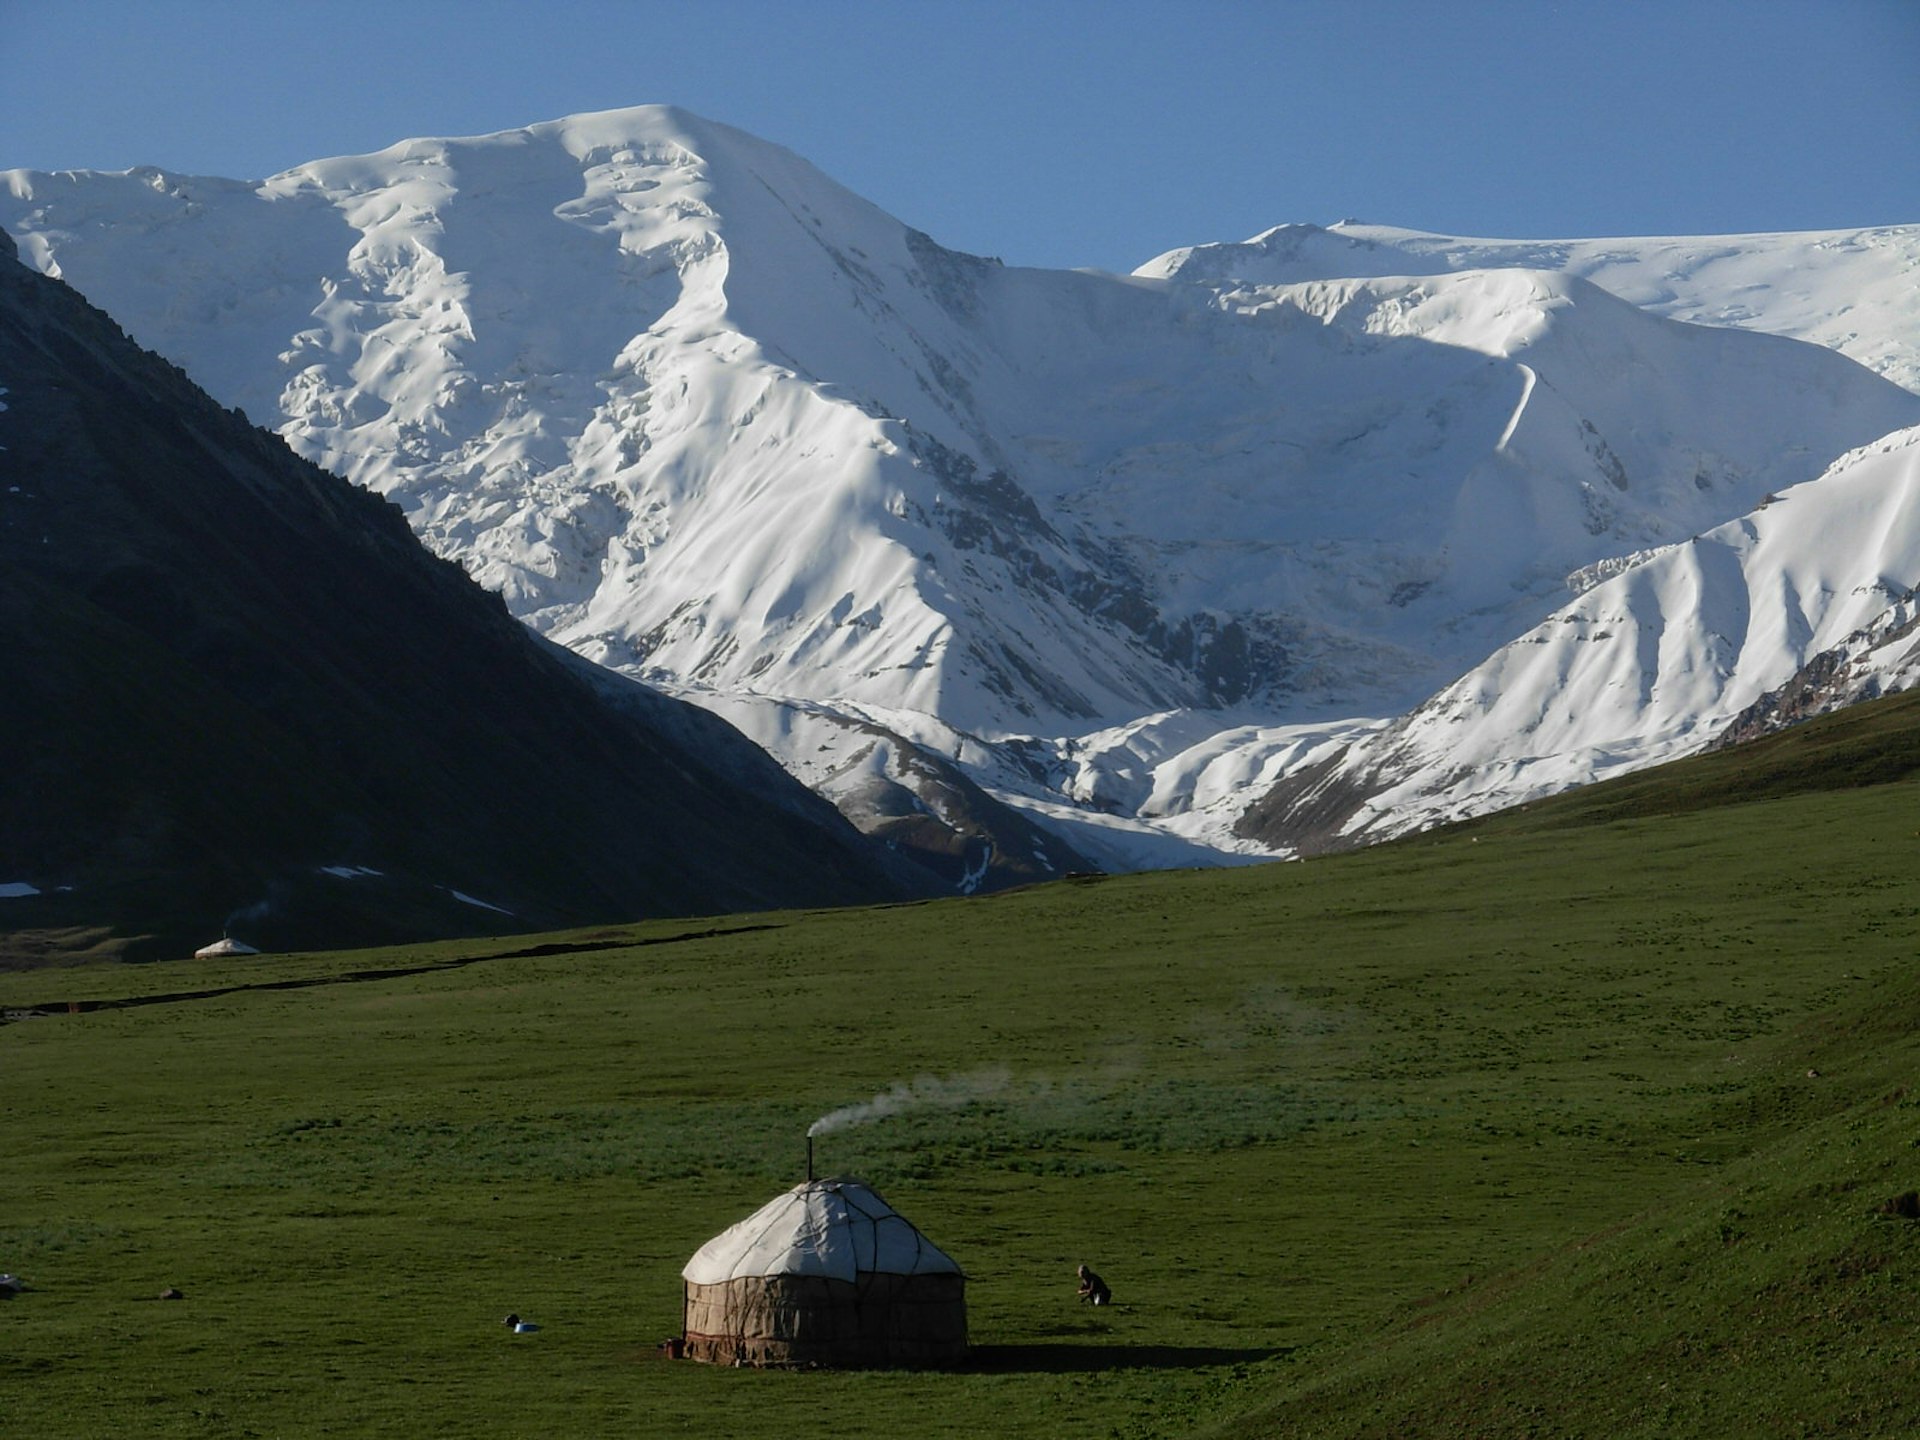 Yurt camps, like the Tuiuk Yurt Camp at Pamir-Alay pictured, are a huge draw for trekkers © Bradley Mayhew / Lonely Planet